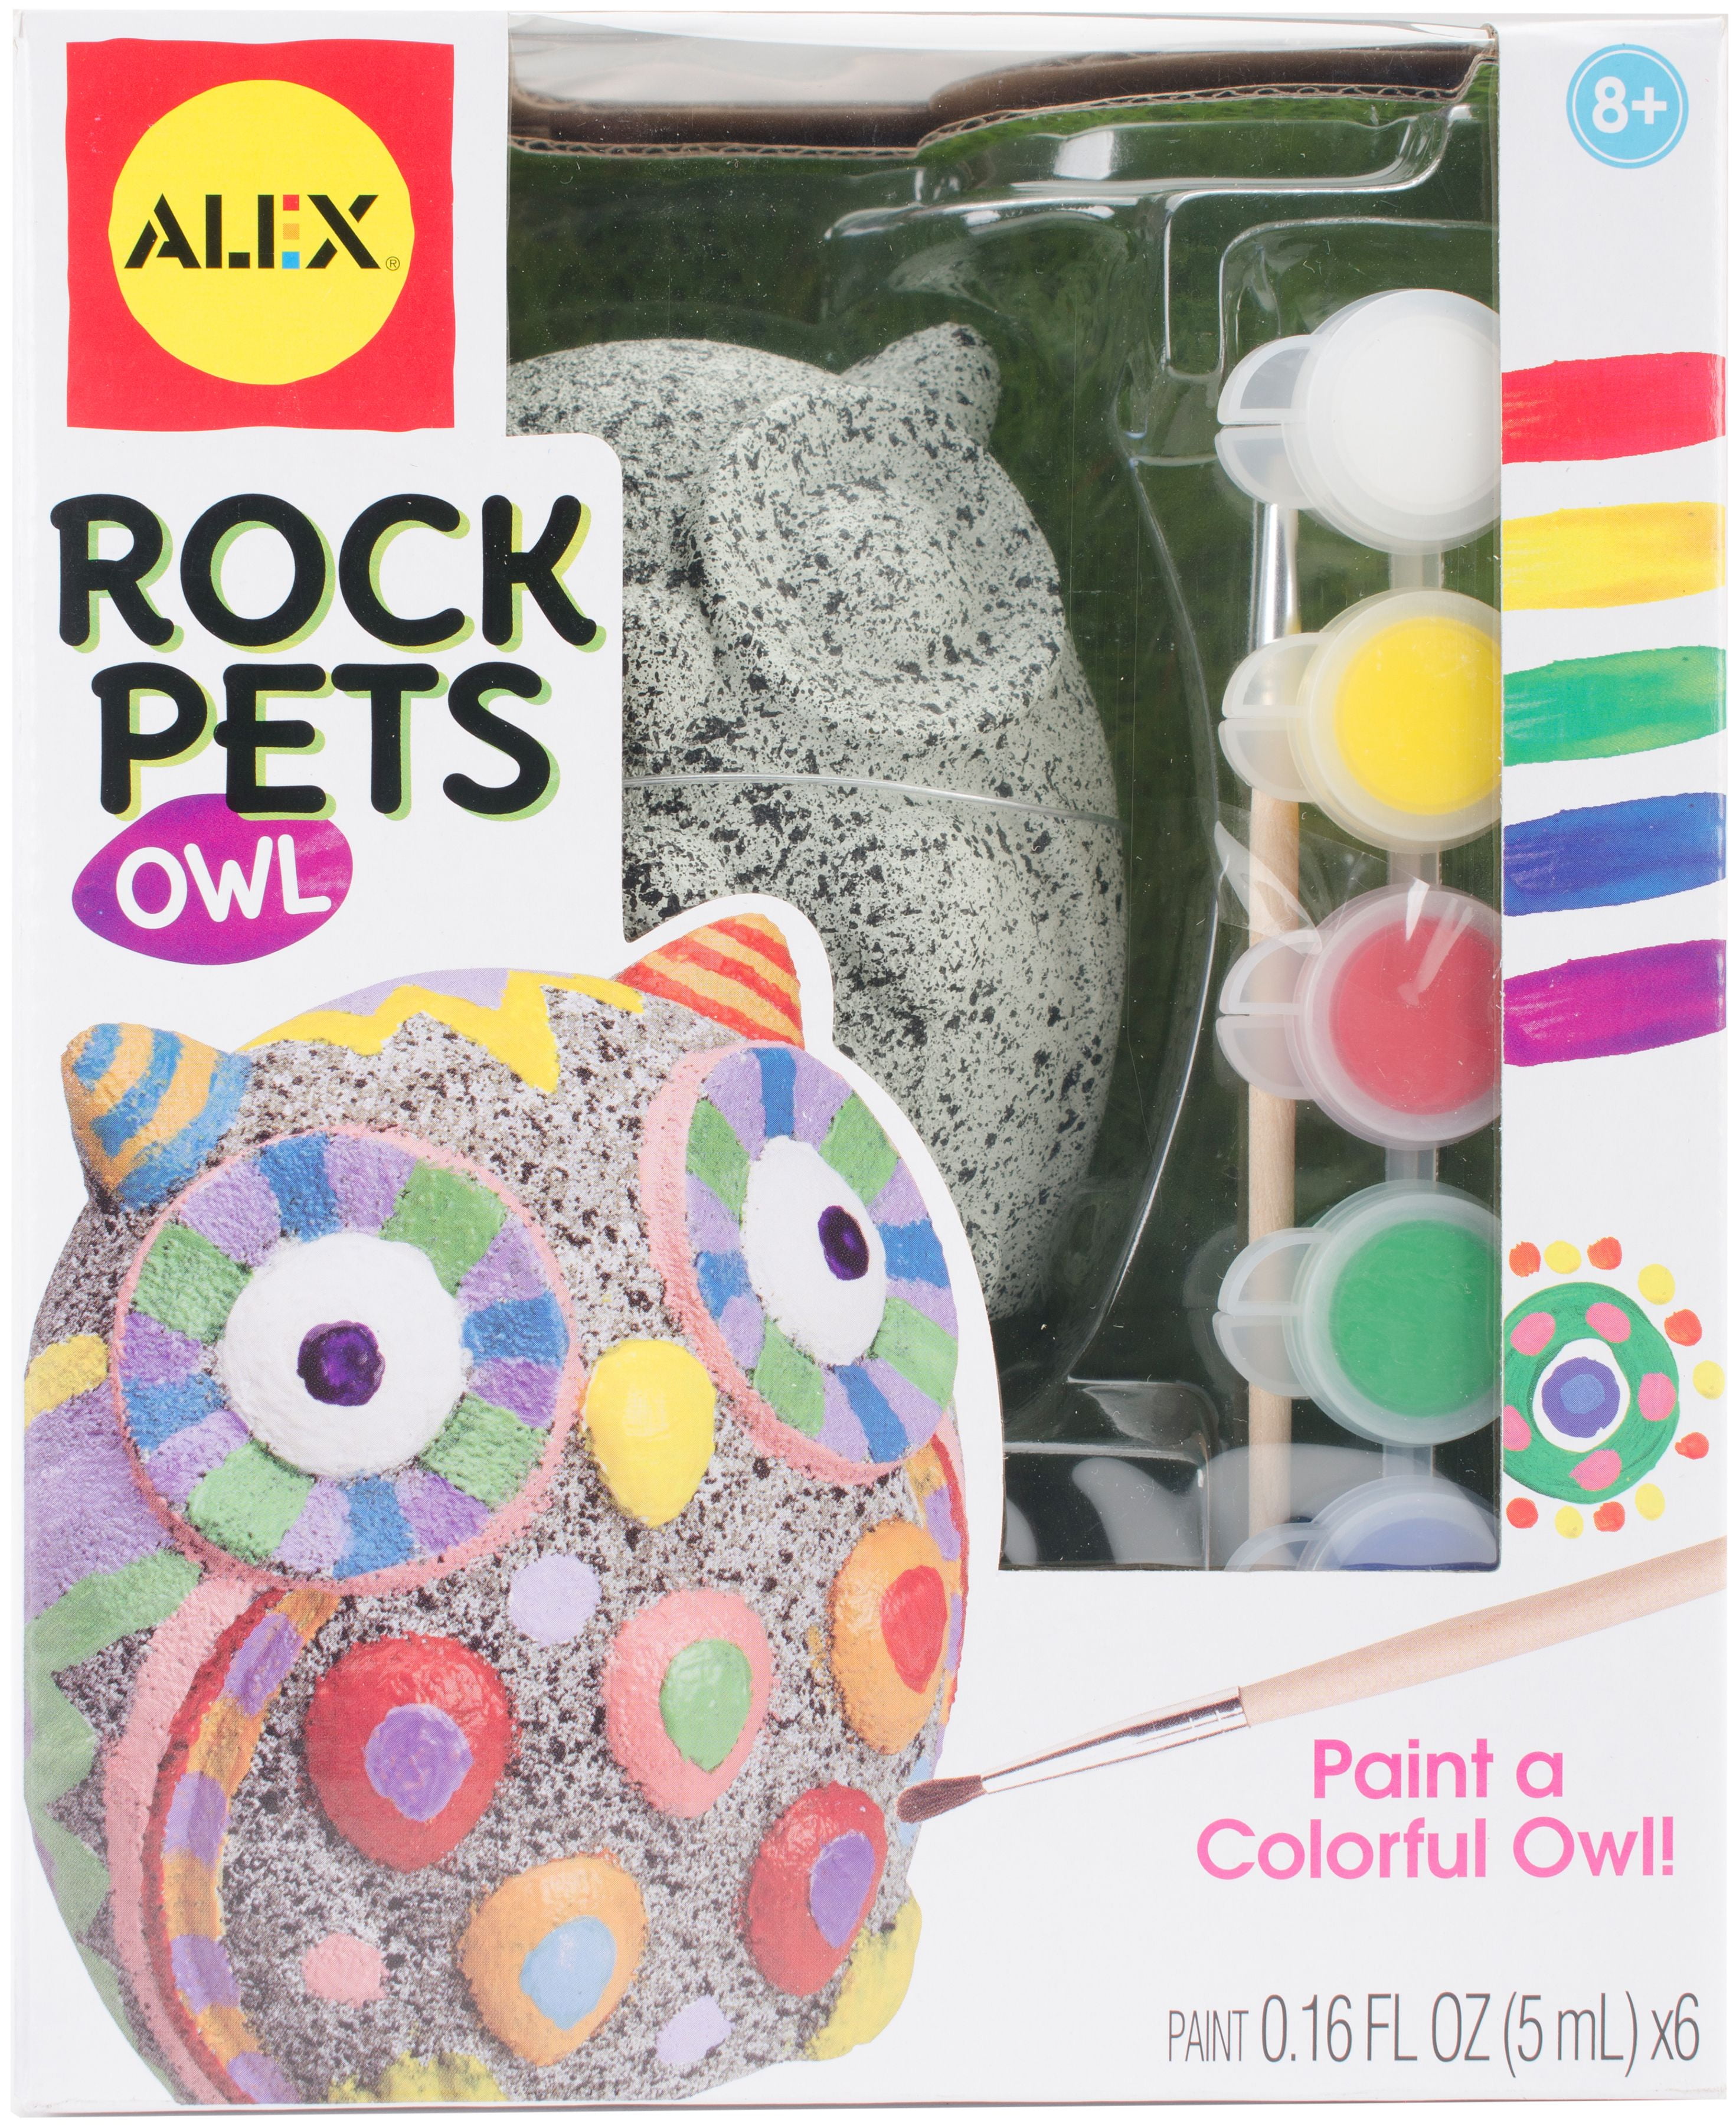 24 Piece Owl Rock Painting Kit for Adults, Kids with Paint Pods, Brushes  and Figurines